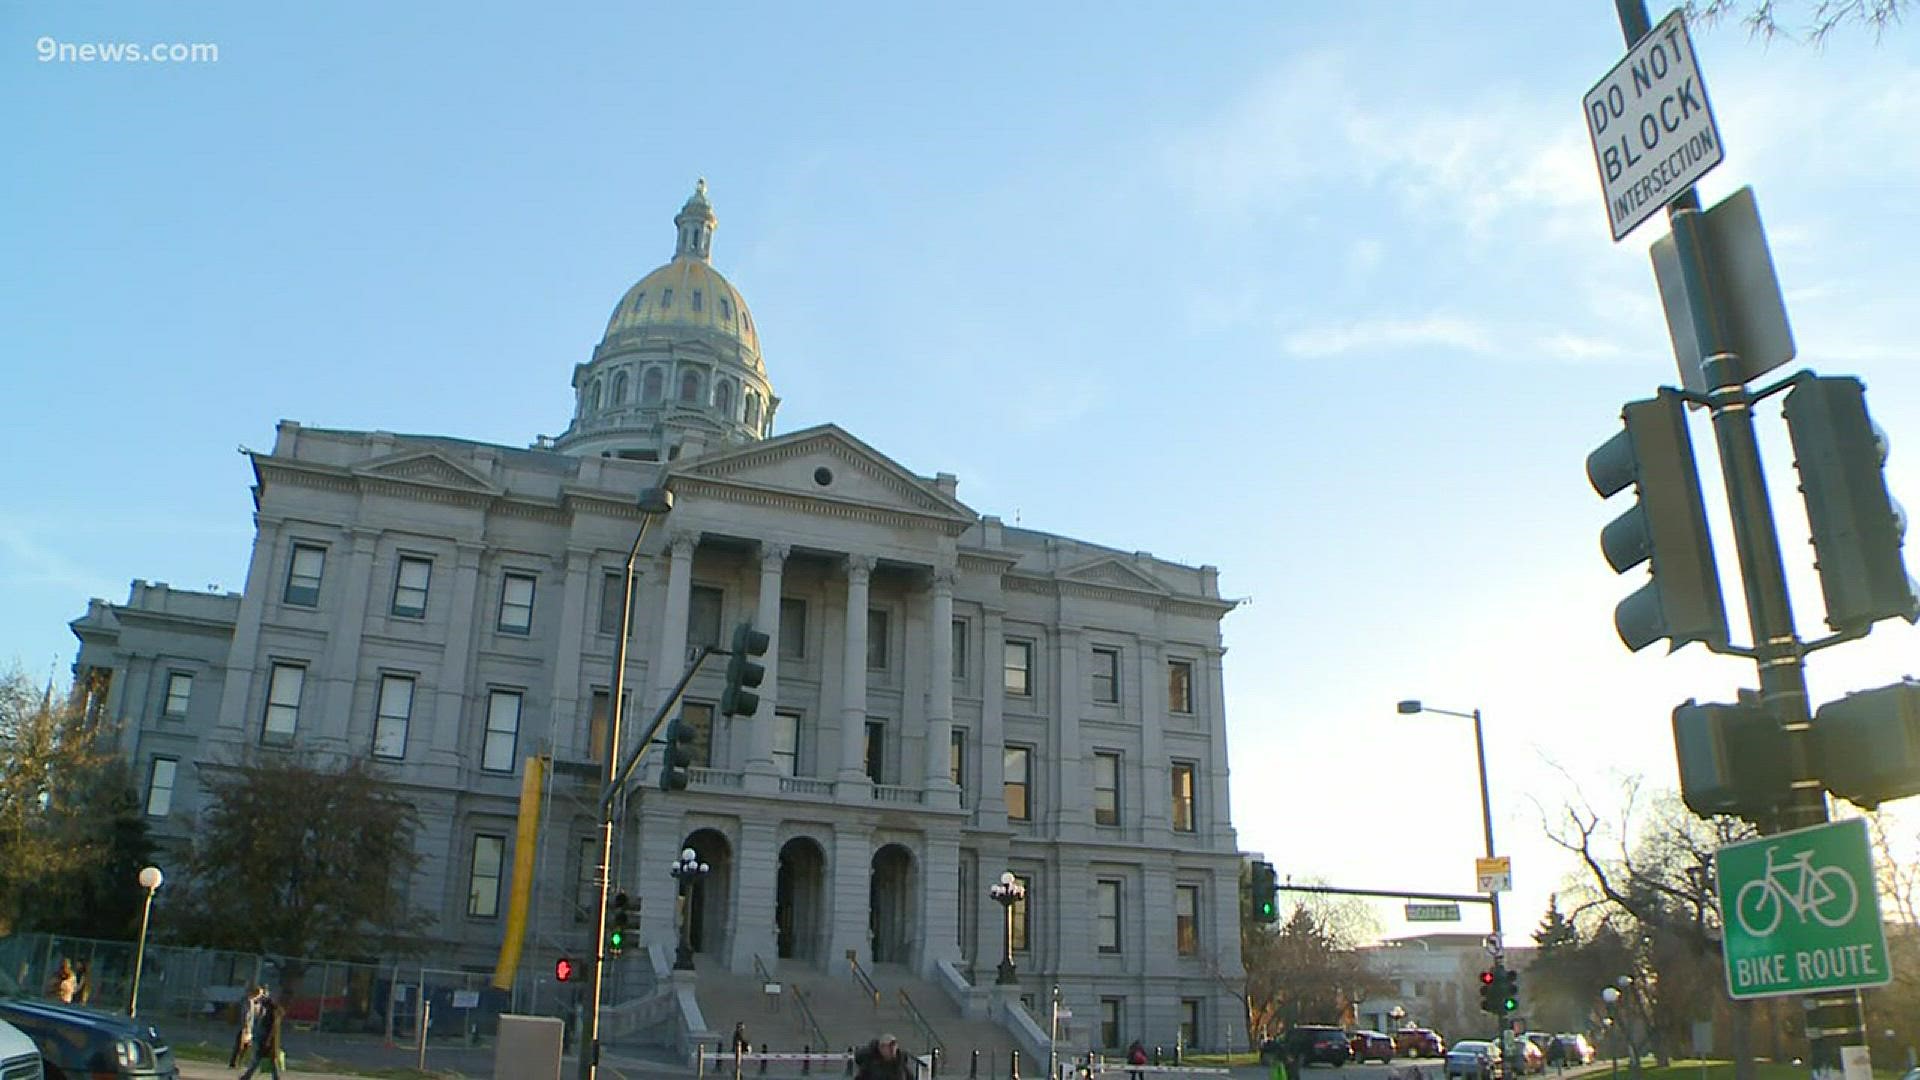 Even though the state legislature shot the idea down earlier this year, Denver is debating safe injection sites once again. Some supporters say things are different this time.